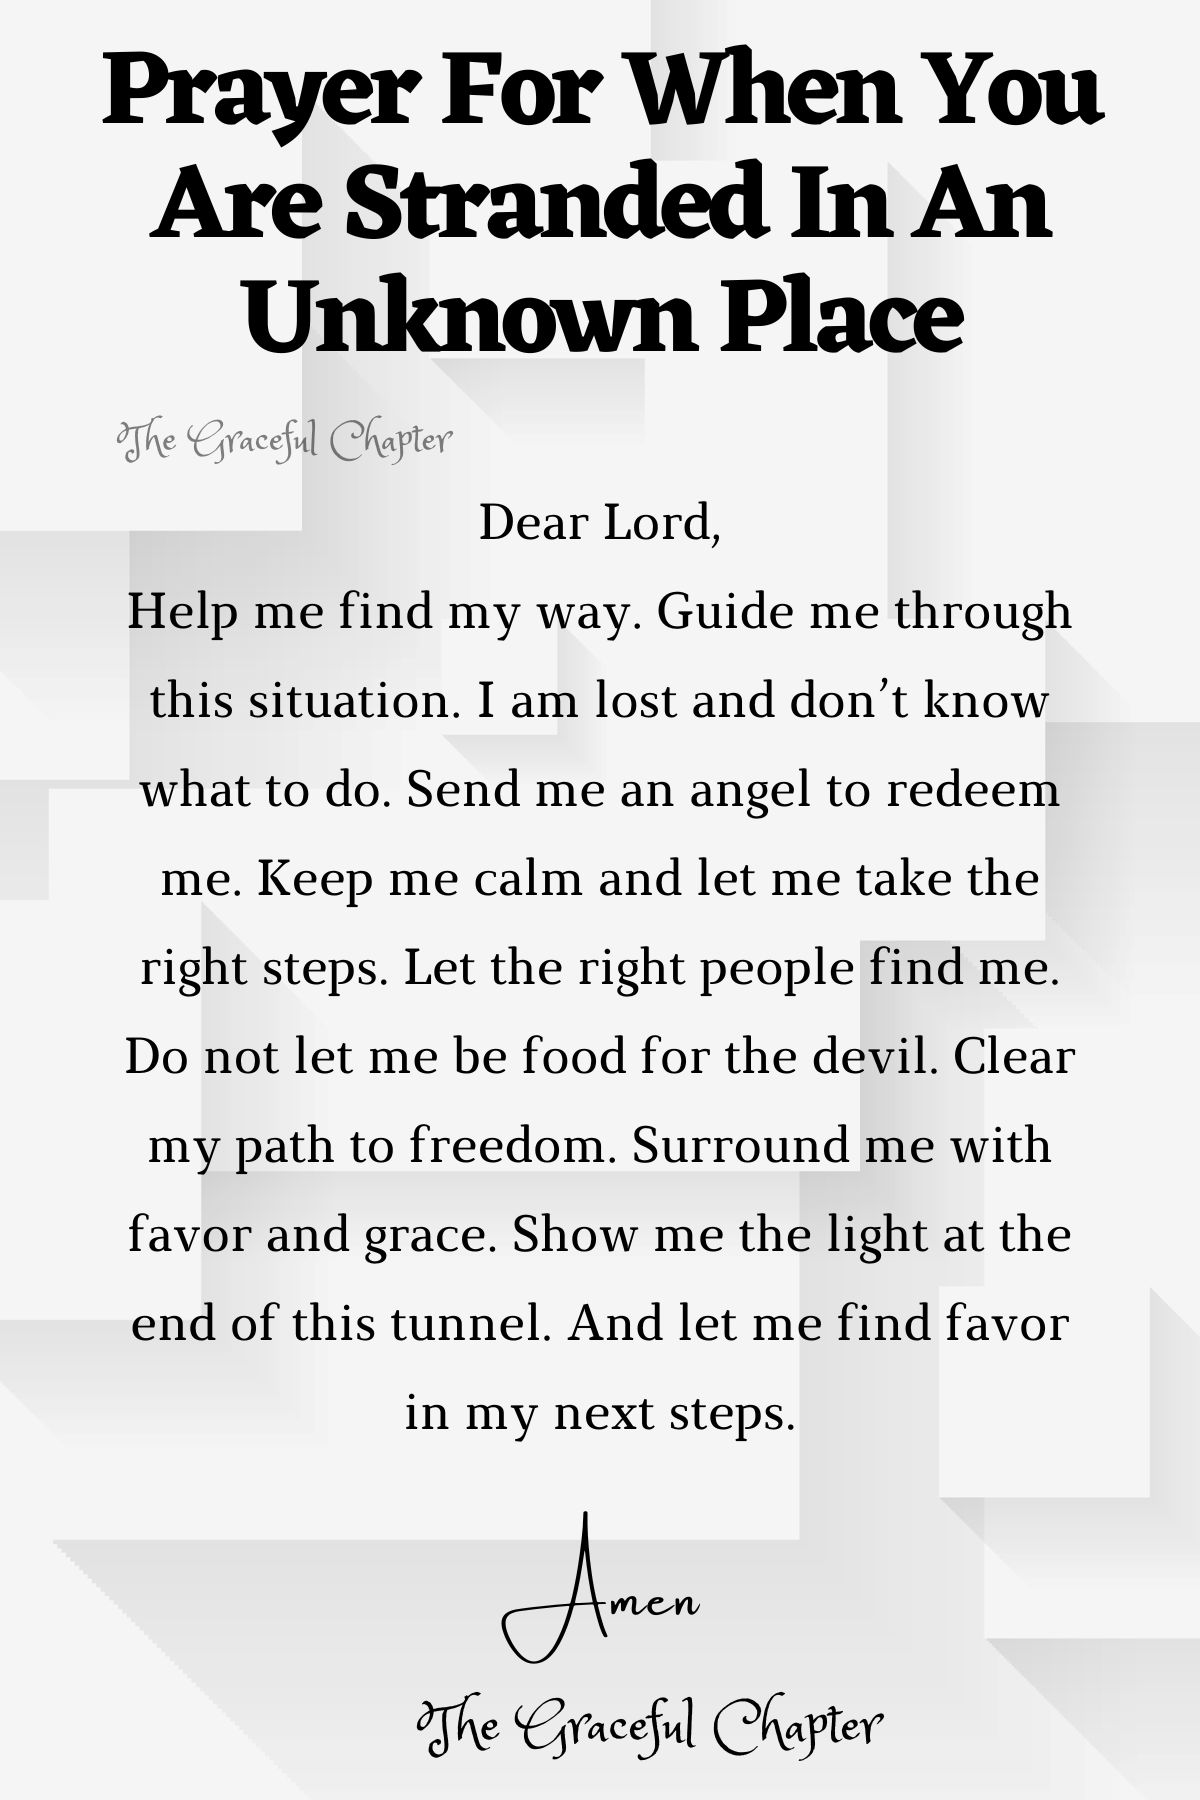 Prayer for when you are Stranded in an unknown place